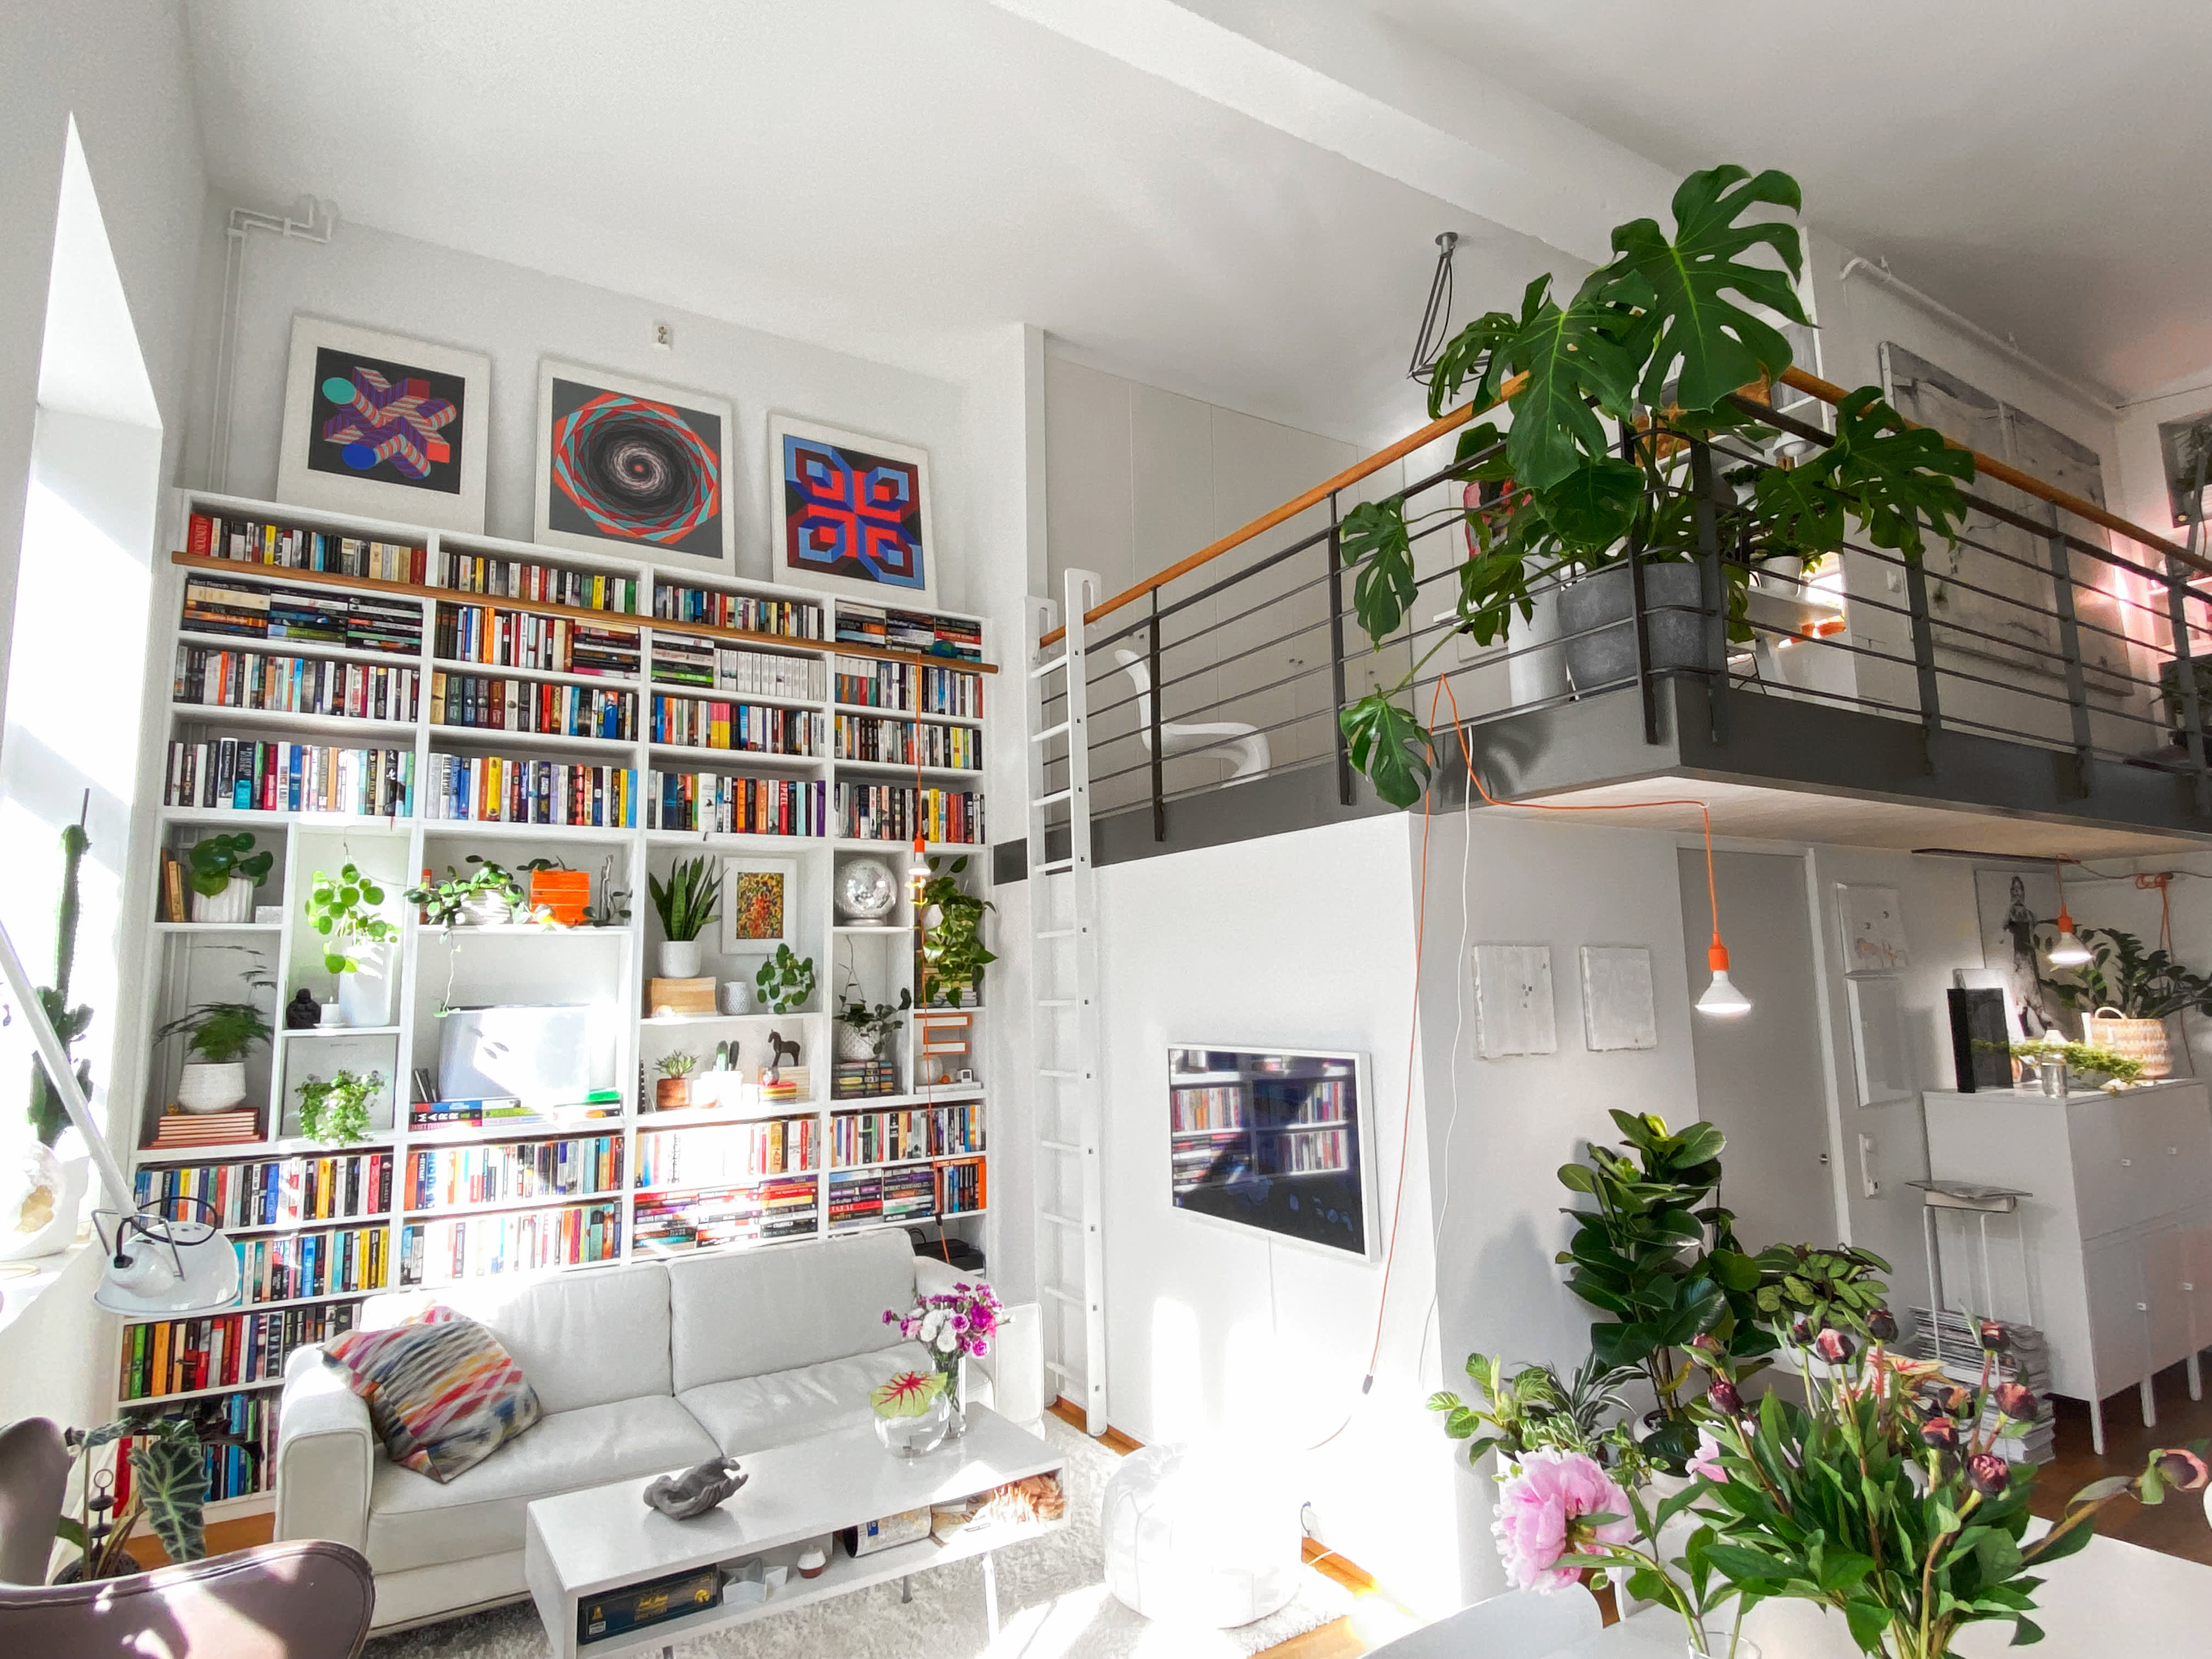 Norway Home With 20,20 Books, 220 Plants and Lofted Bedroom ...